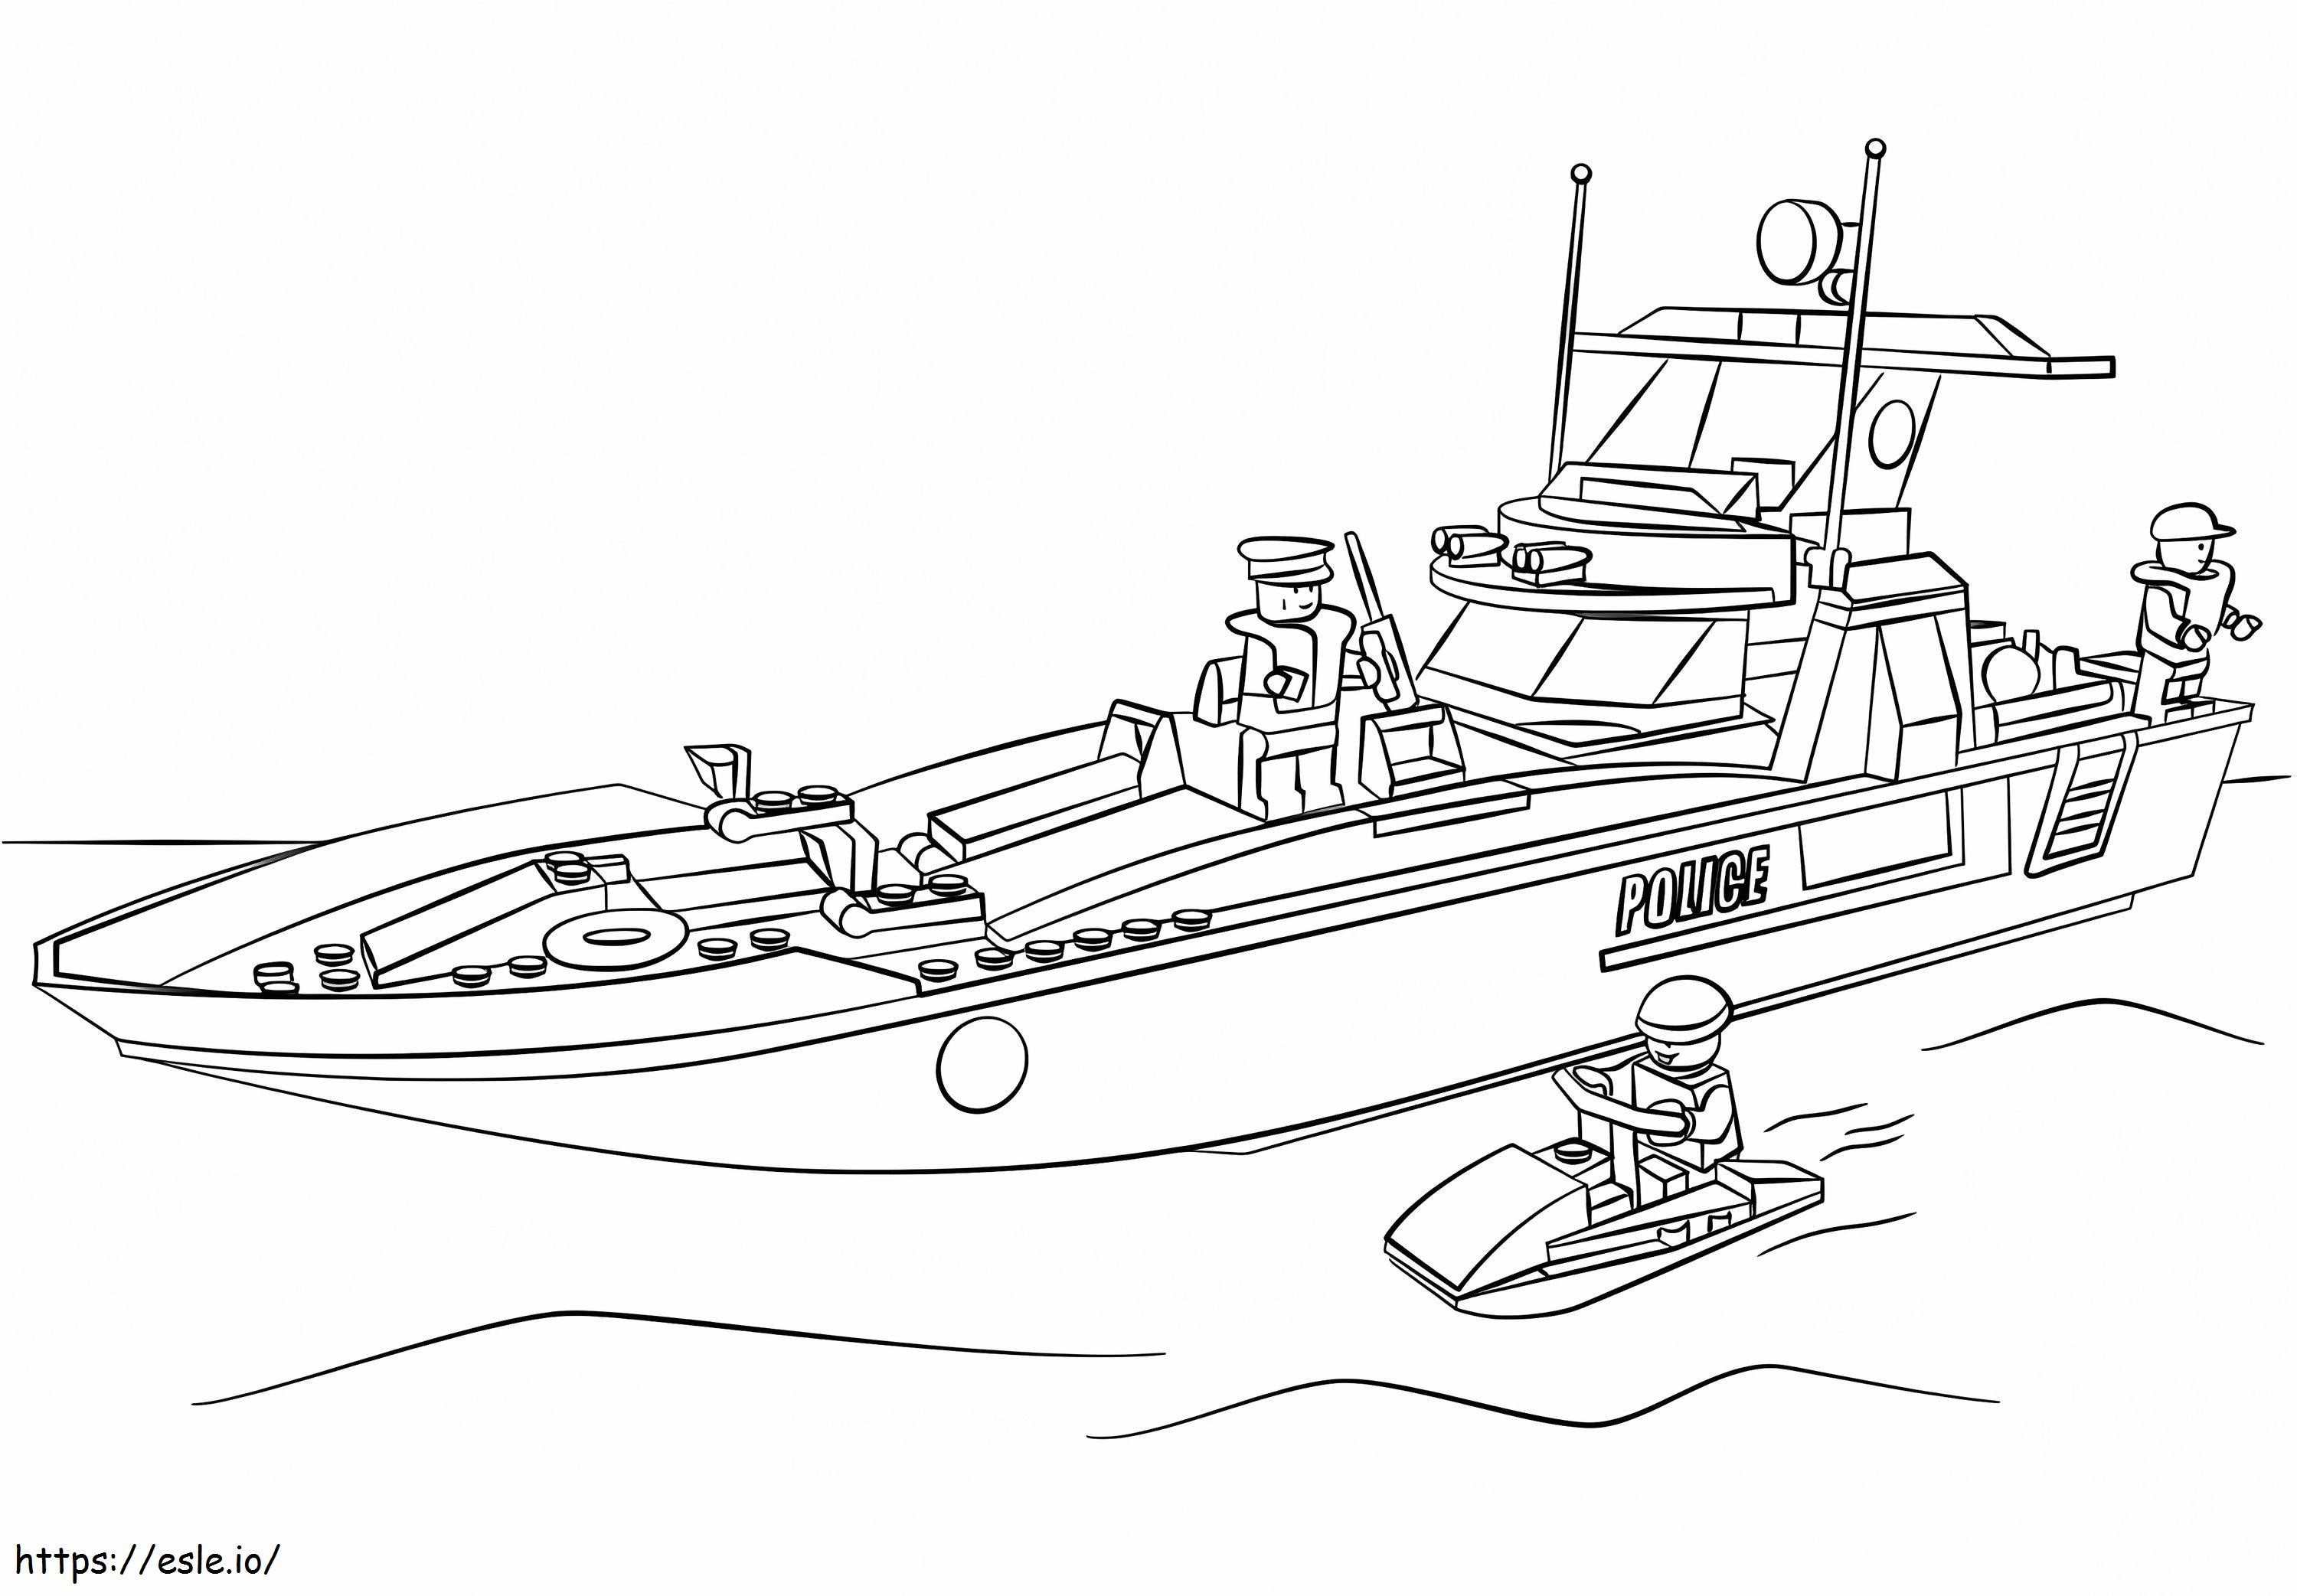 Lego City Police Boat coloring page